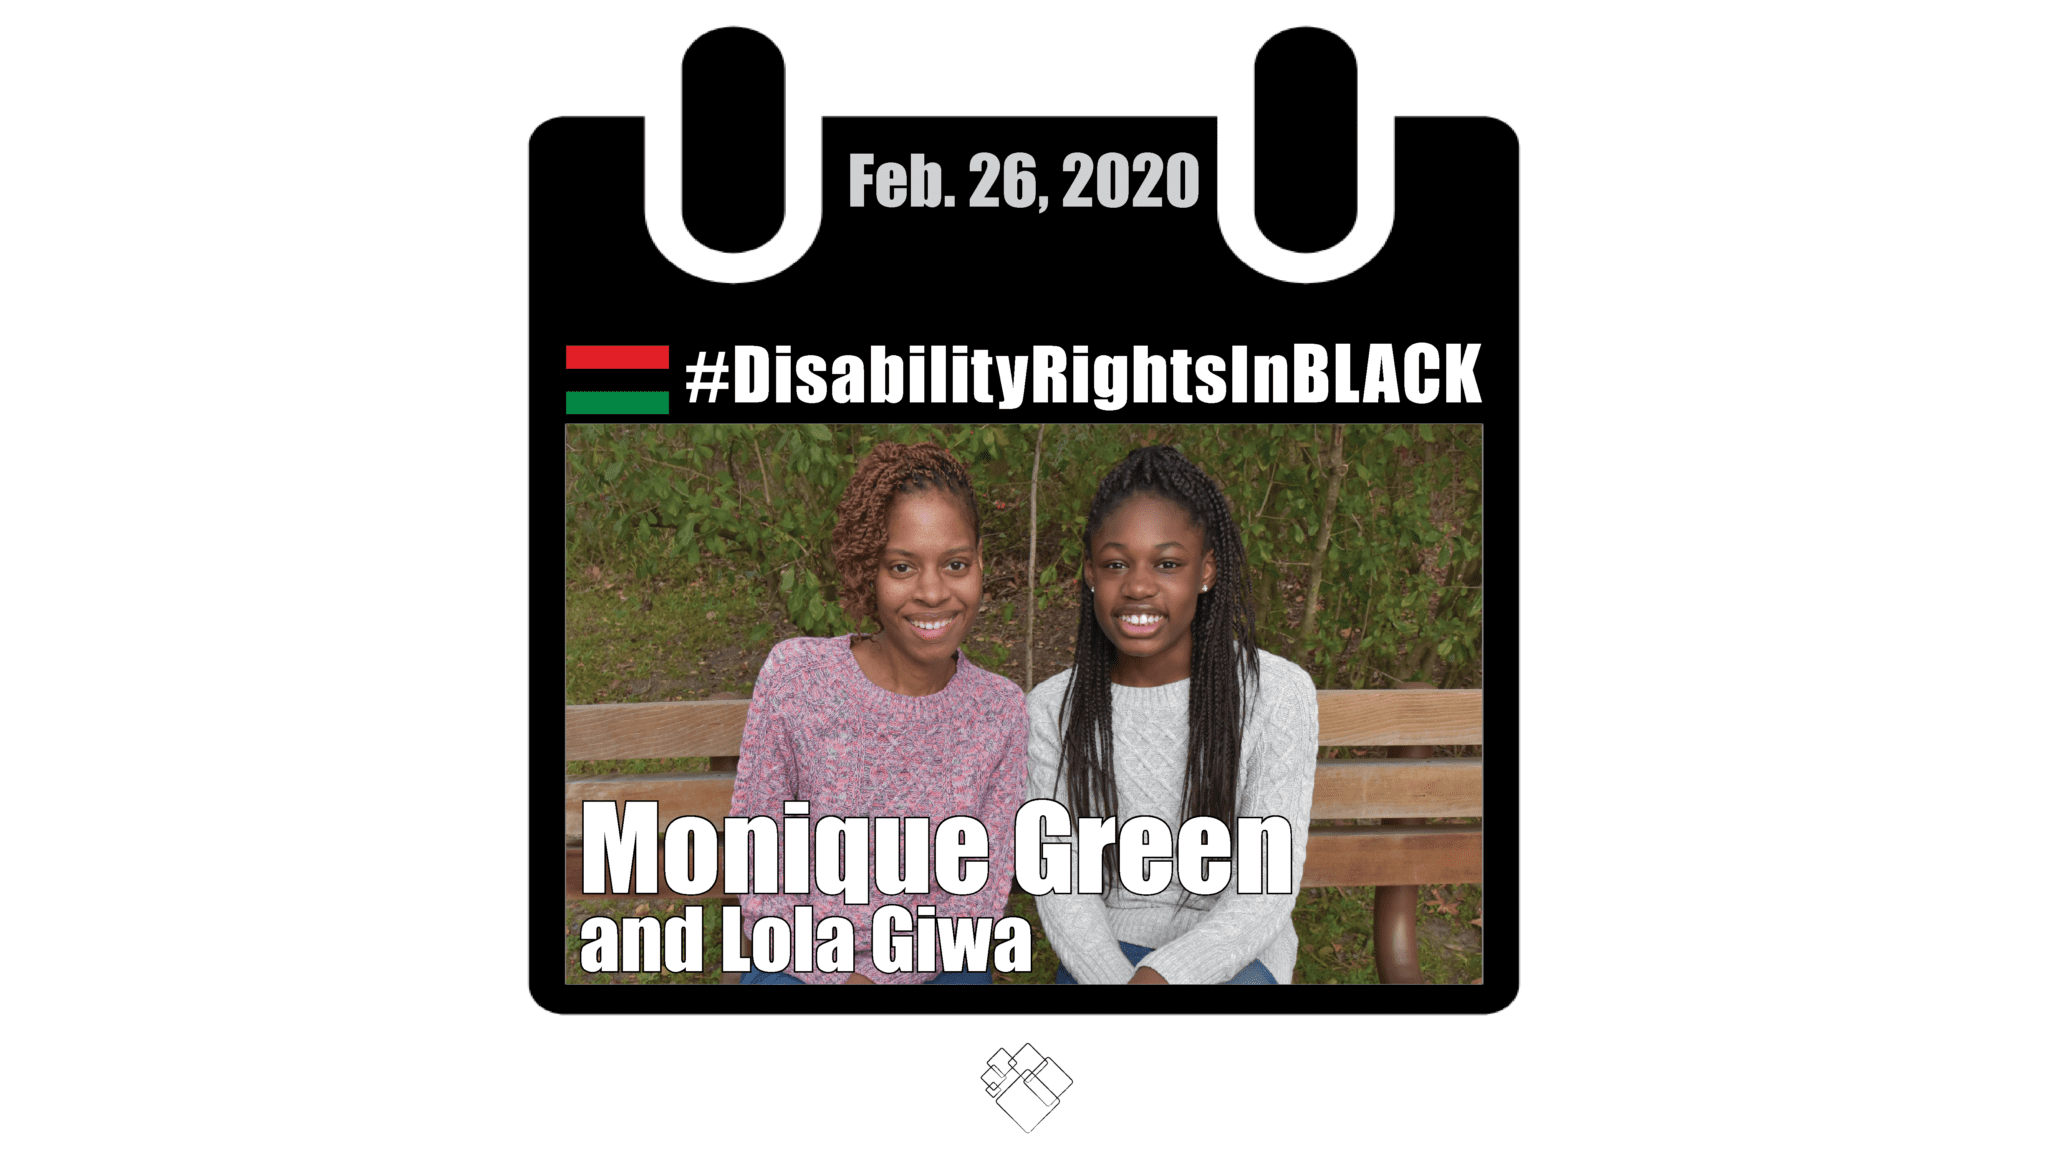 Photo of Monique and Lola sitting side by side on an outdoor bench, both are smiling for the camera. The image of them has the Disability Rights in Black calendar style frame graphic with the hashtag for the series at the top and the date, February 26, 2020.